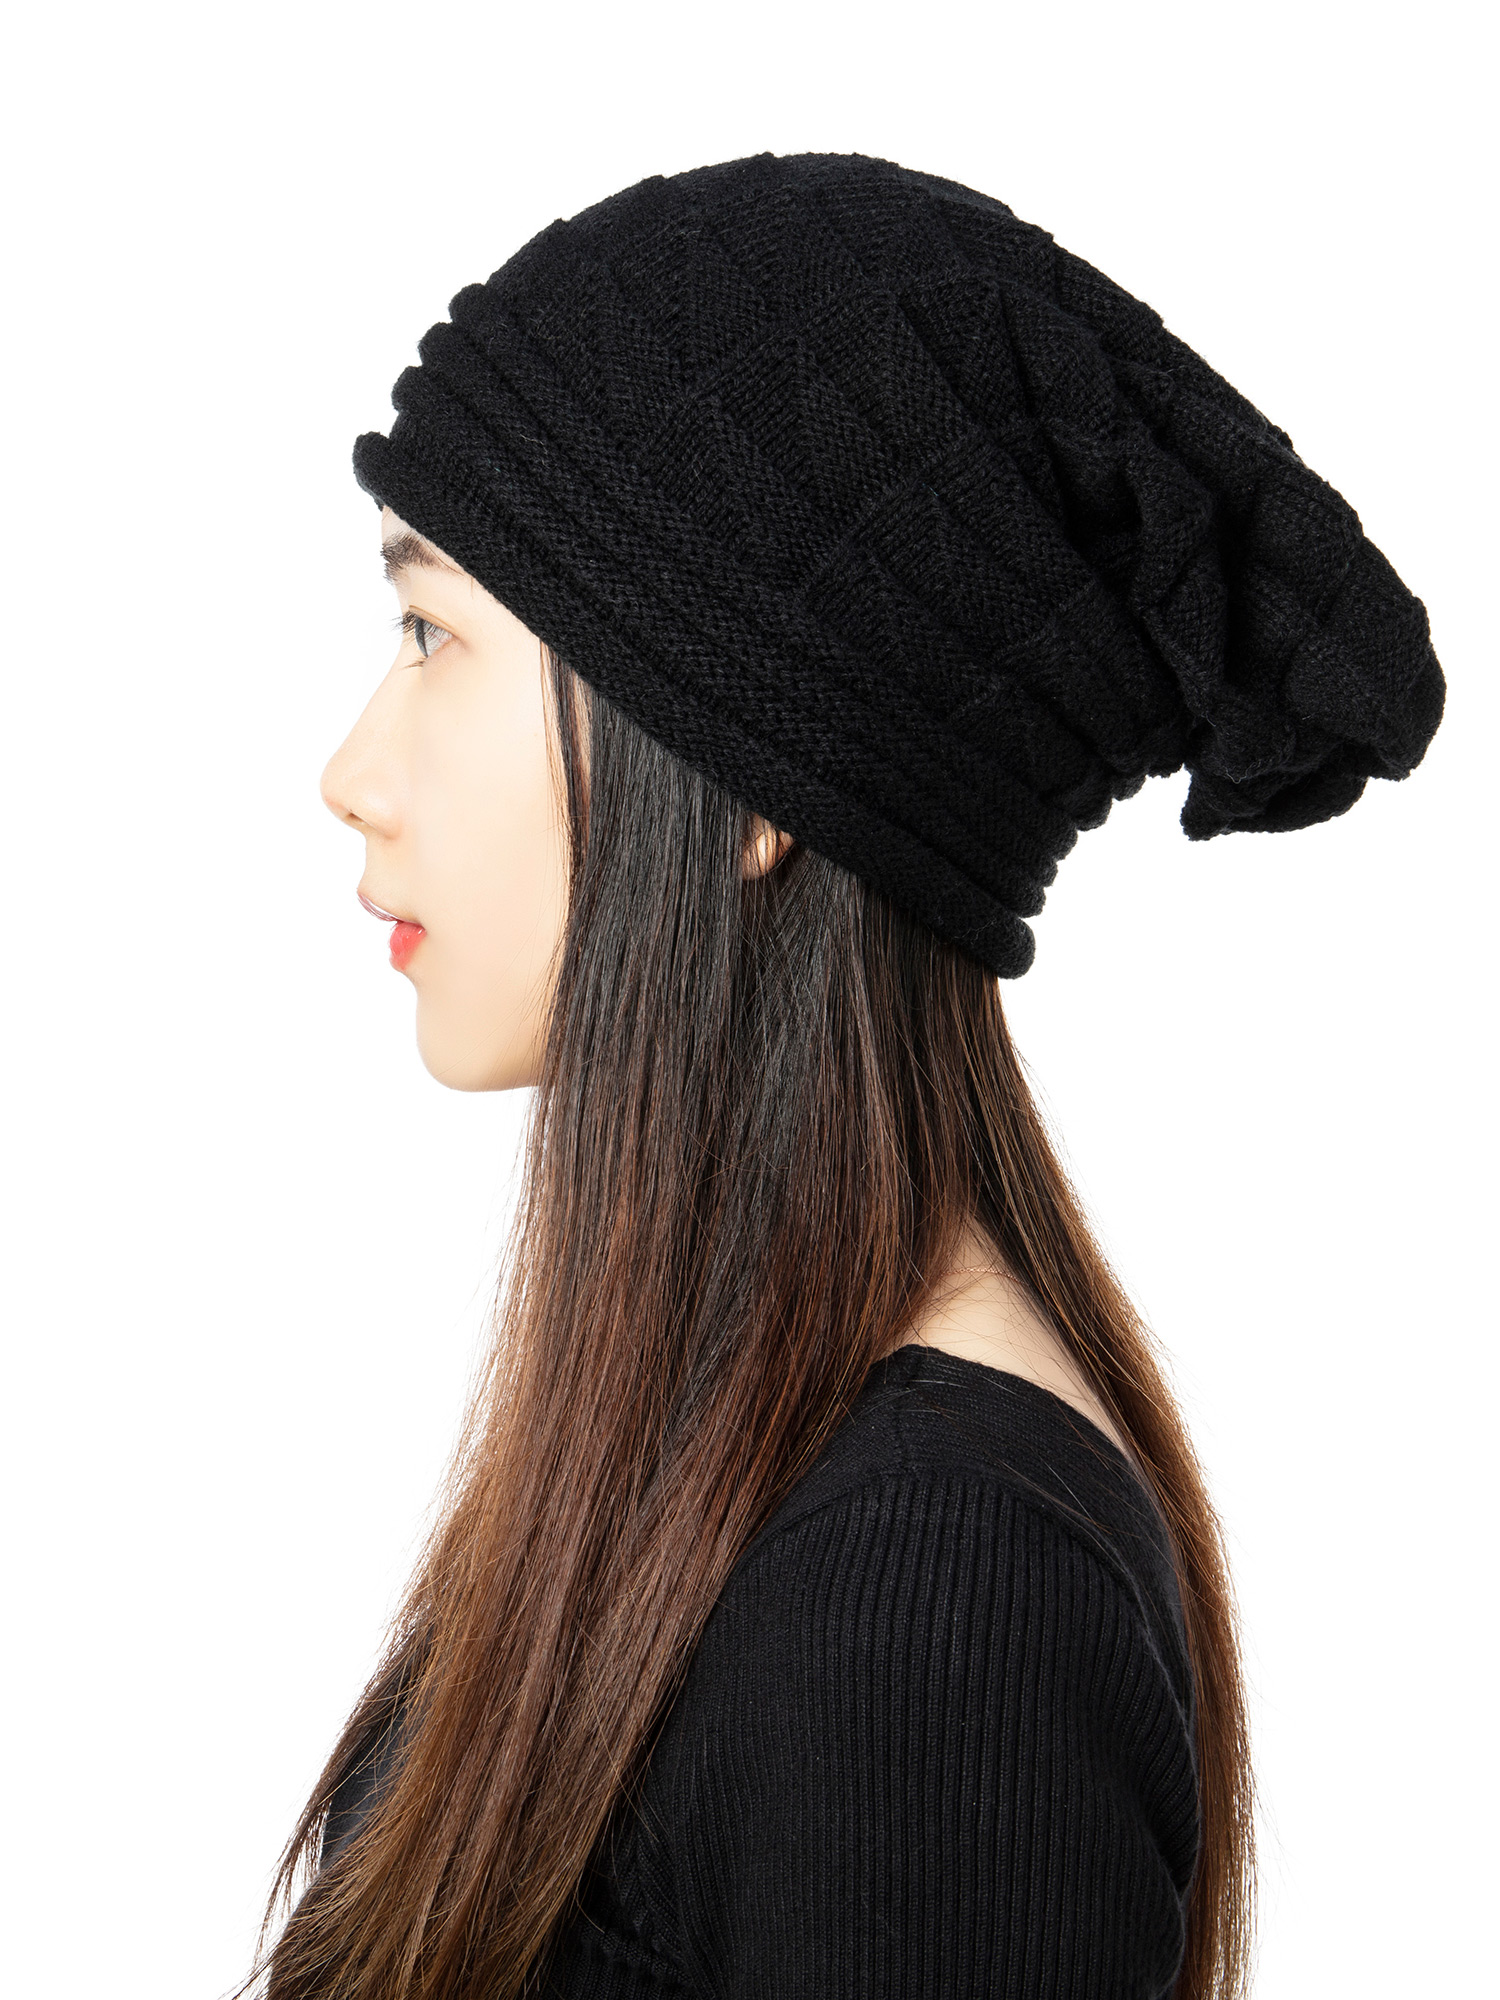 Fashion Autumn Winter Girl Beanie Hat Women Slouch Winter Knit Hip-hop Cap Beanie Baggy Hat Ski Crochet Oversized Chunky Stretchy Slouchy Beanie Hat 2 Pack - image 3 of 8